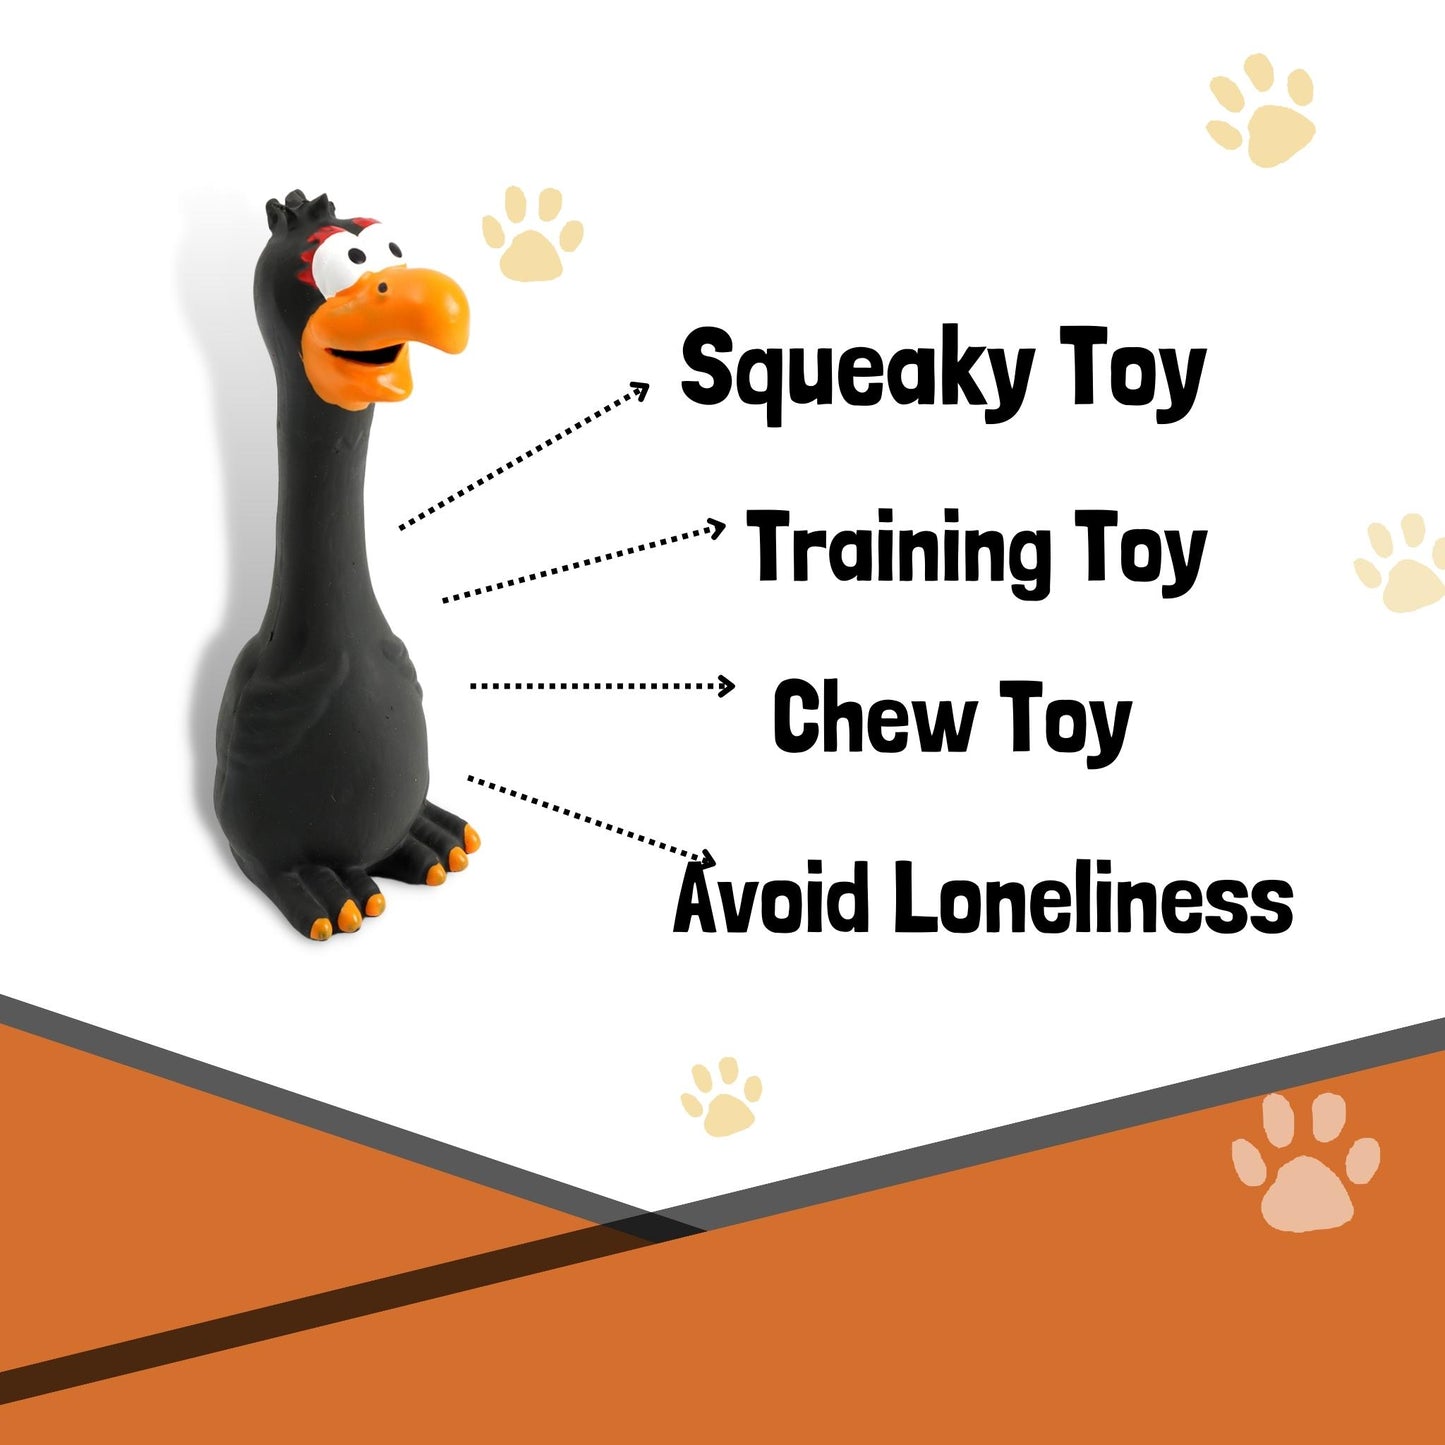 Foodie Puppies Latex Rubber Squeaky Dog Chew Toy - Black Eagle